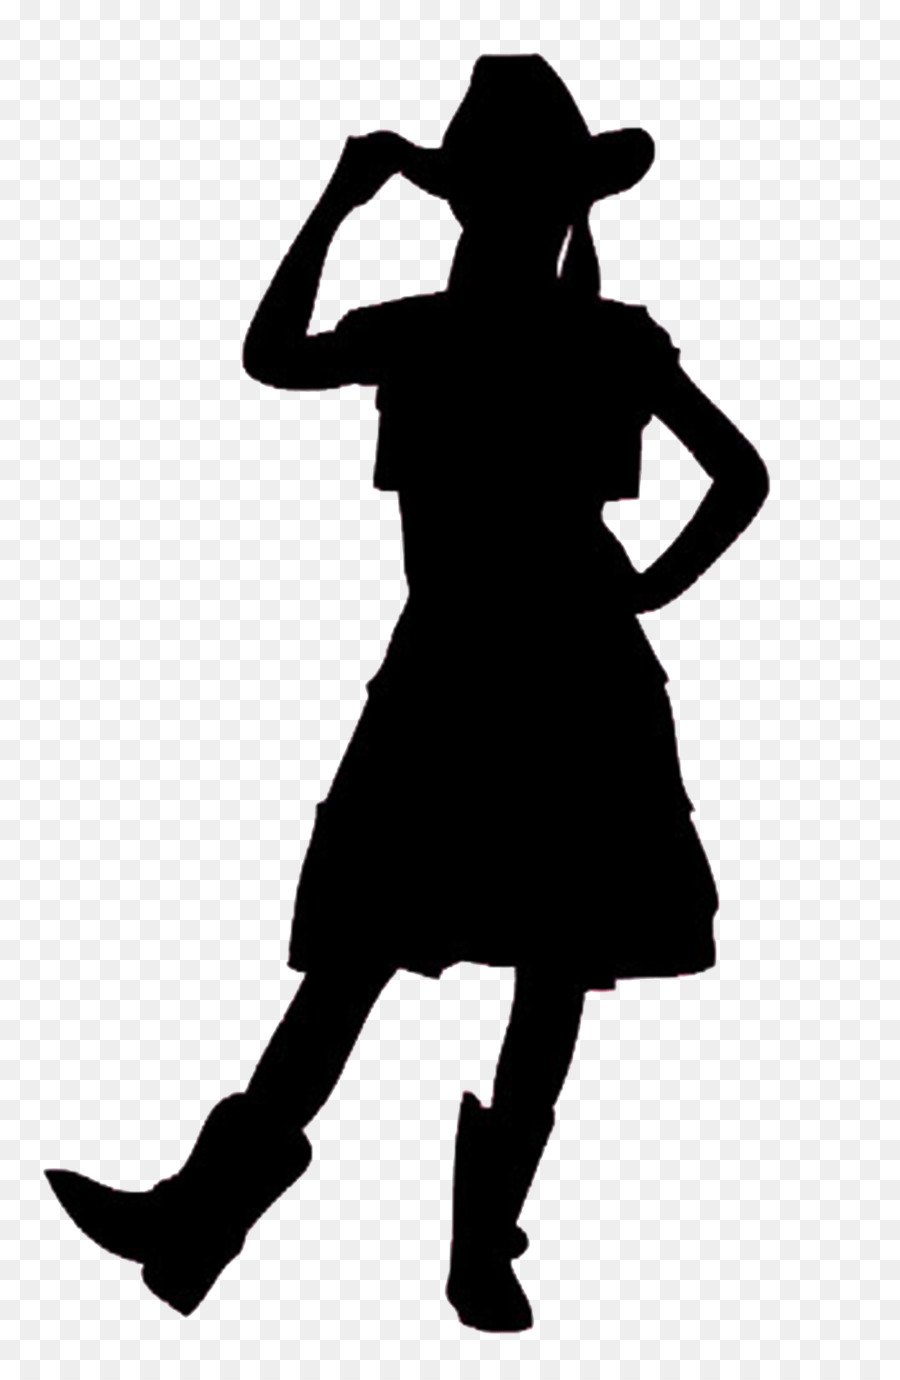 Silhouette Cowboy Woman on top Clip art - cowgirl png download - 1300*1973 - Free Transparent Silhouette png Download.